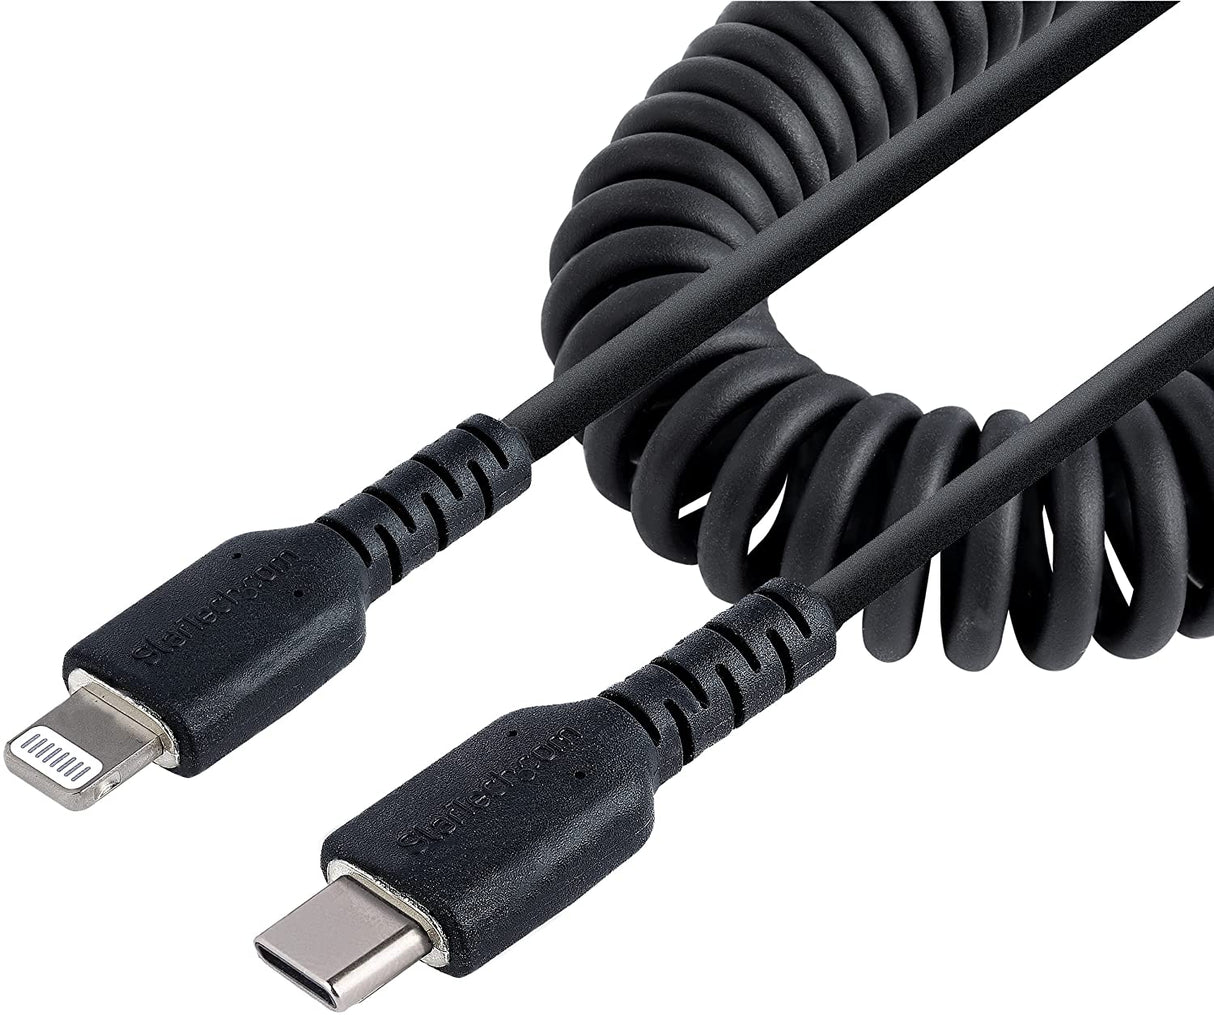 StarTech.com 1m (3ft) USB C to Lightning Cable, MFi Certified, Coiled iPhone Charger Cable, Black, Durable TPE Jacket Aramid Fiber, Heavy Duty Coil Lightning Cable (RUSB2CLT1MBC) 1m / 3ft USB-C